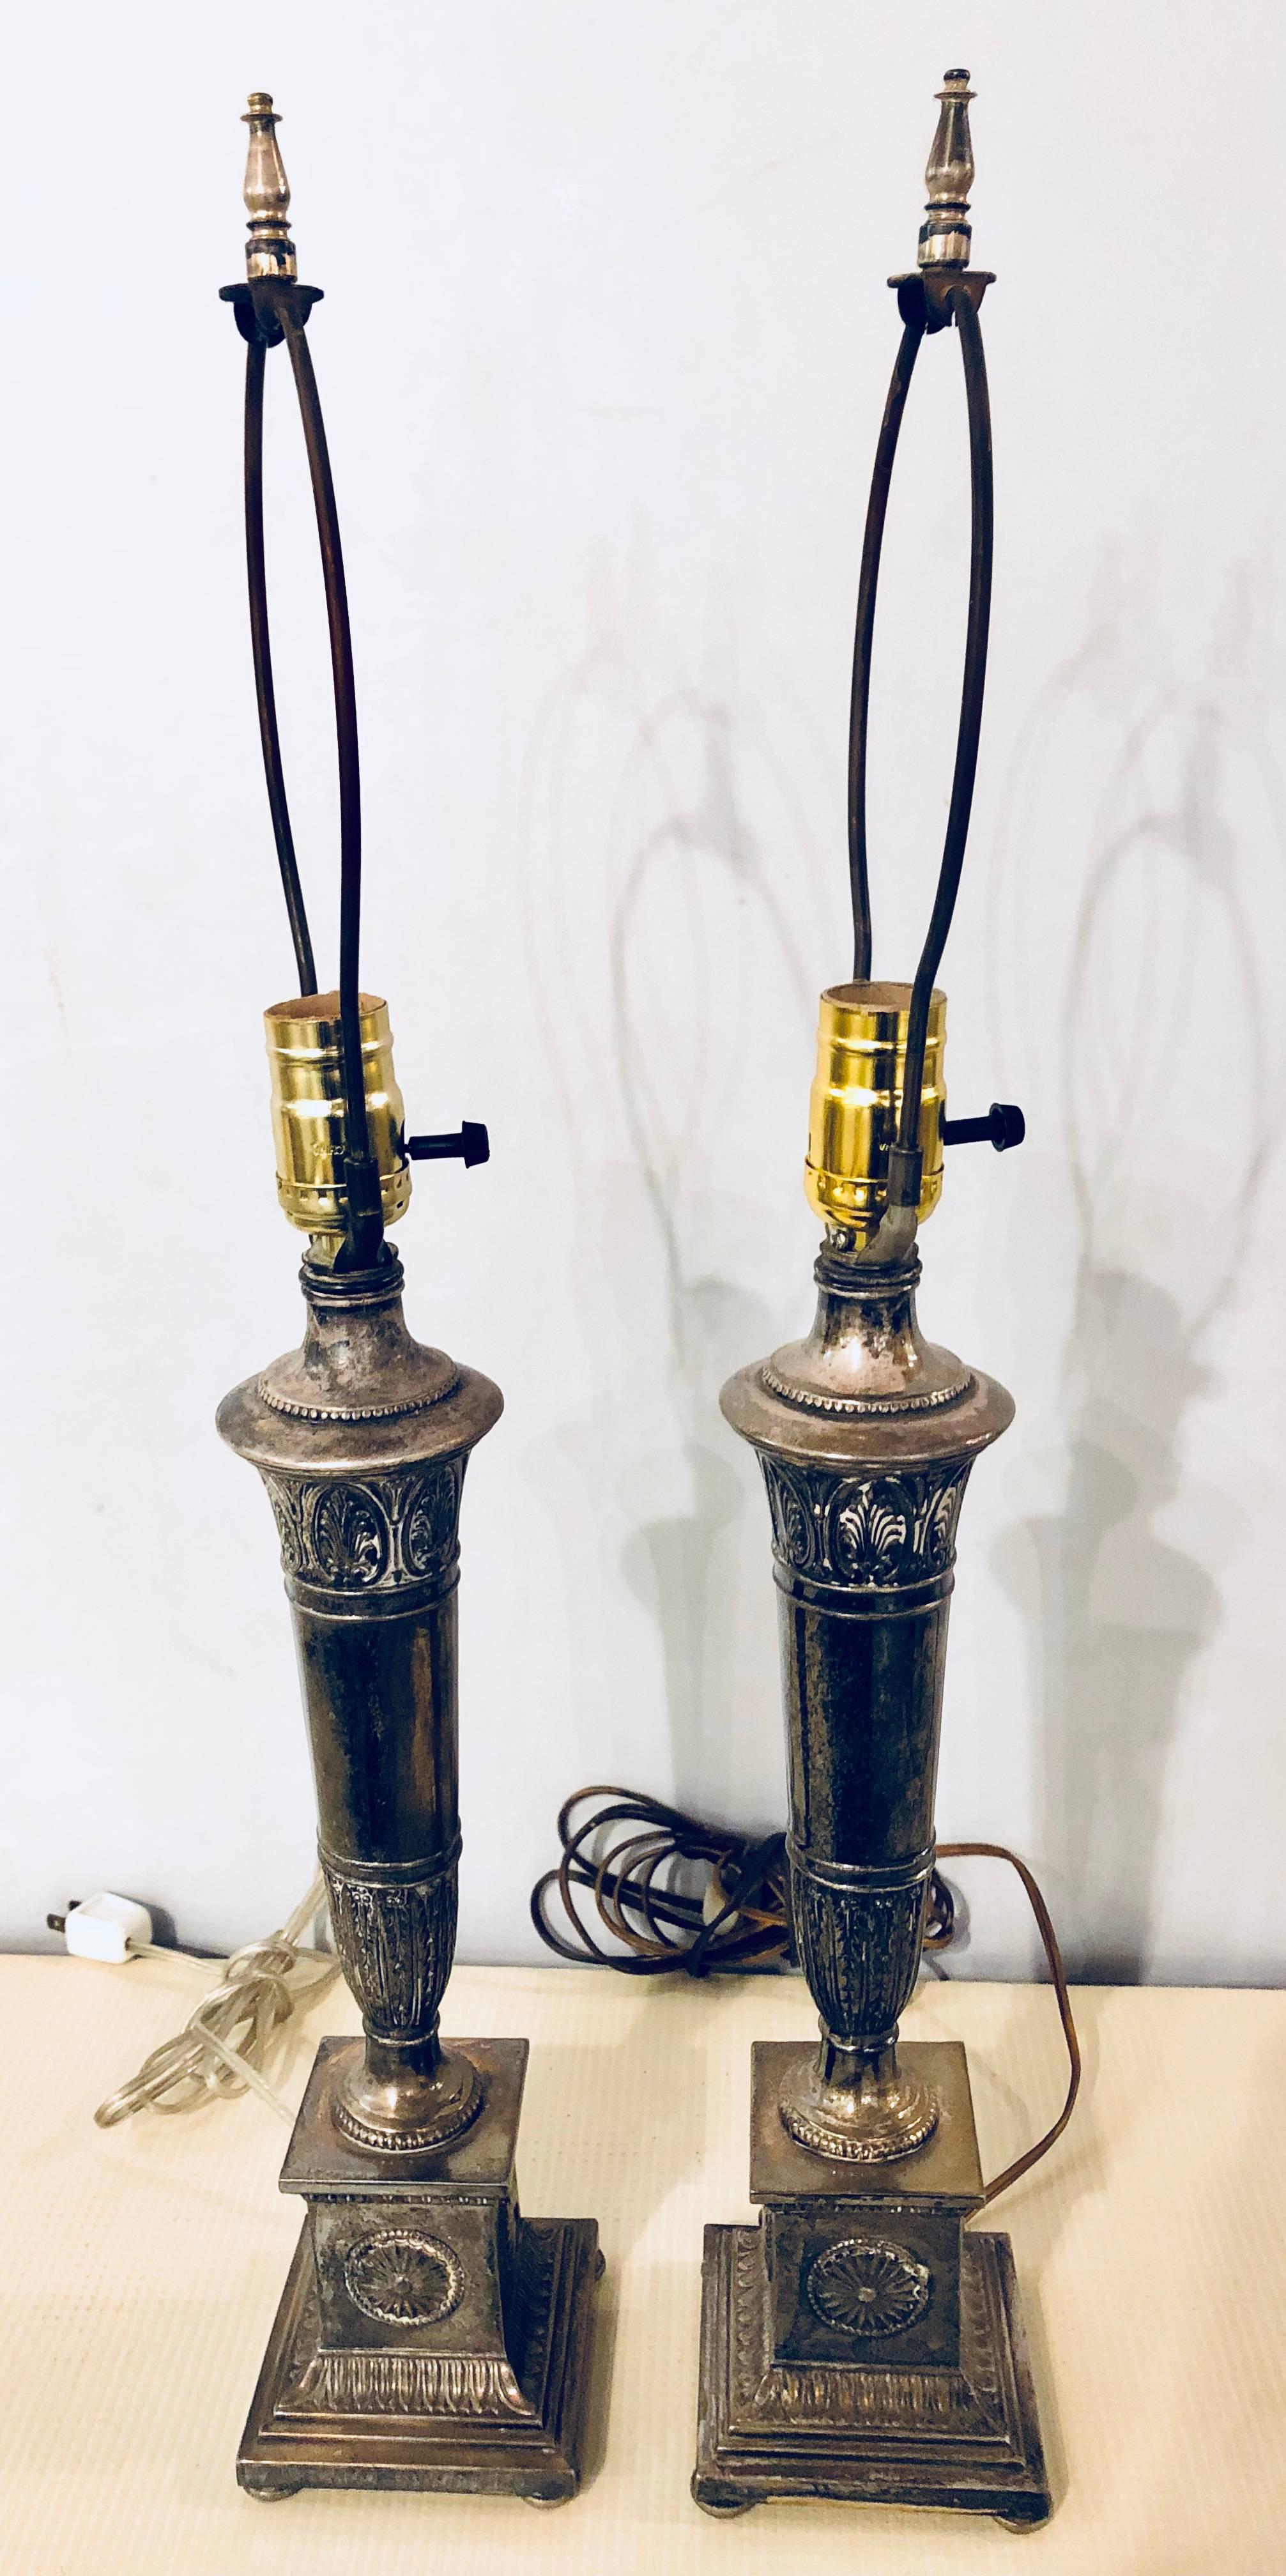 Pair of neoclassic style silvered metal lamps with custom metal shades. These antique table lamps are wonderfully patinated silver plated lamps can easily be cleaned to have a fine silver shine.